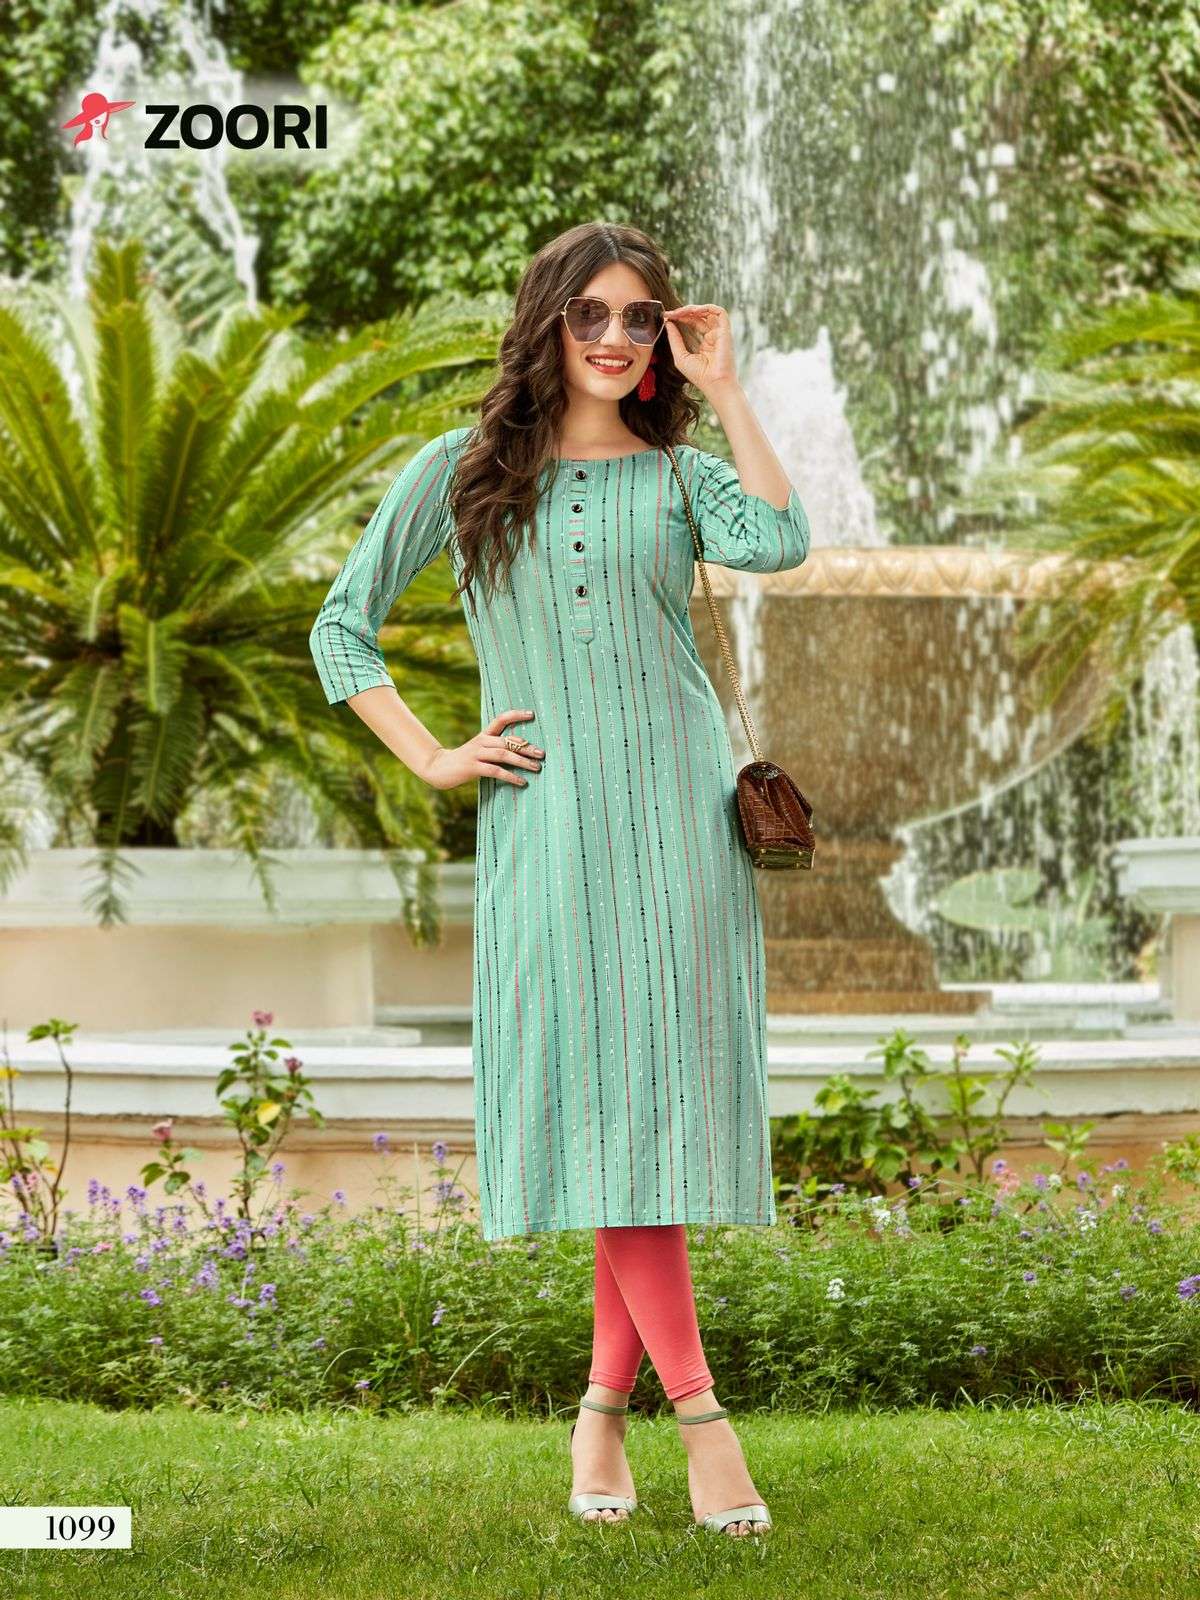 AKSHARA VOL-17 BY ZOORI 1099 TO 1104 SERIES DESIGNER STYLISH FANCY COLORFUL BEAUTIFUL PARTY WEAR & ETHNIC WEAR COLLECTION RAYON PRINT KURTIS AT WHOLESALE PRICE